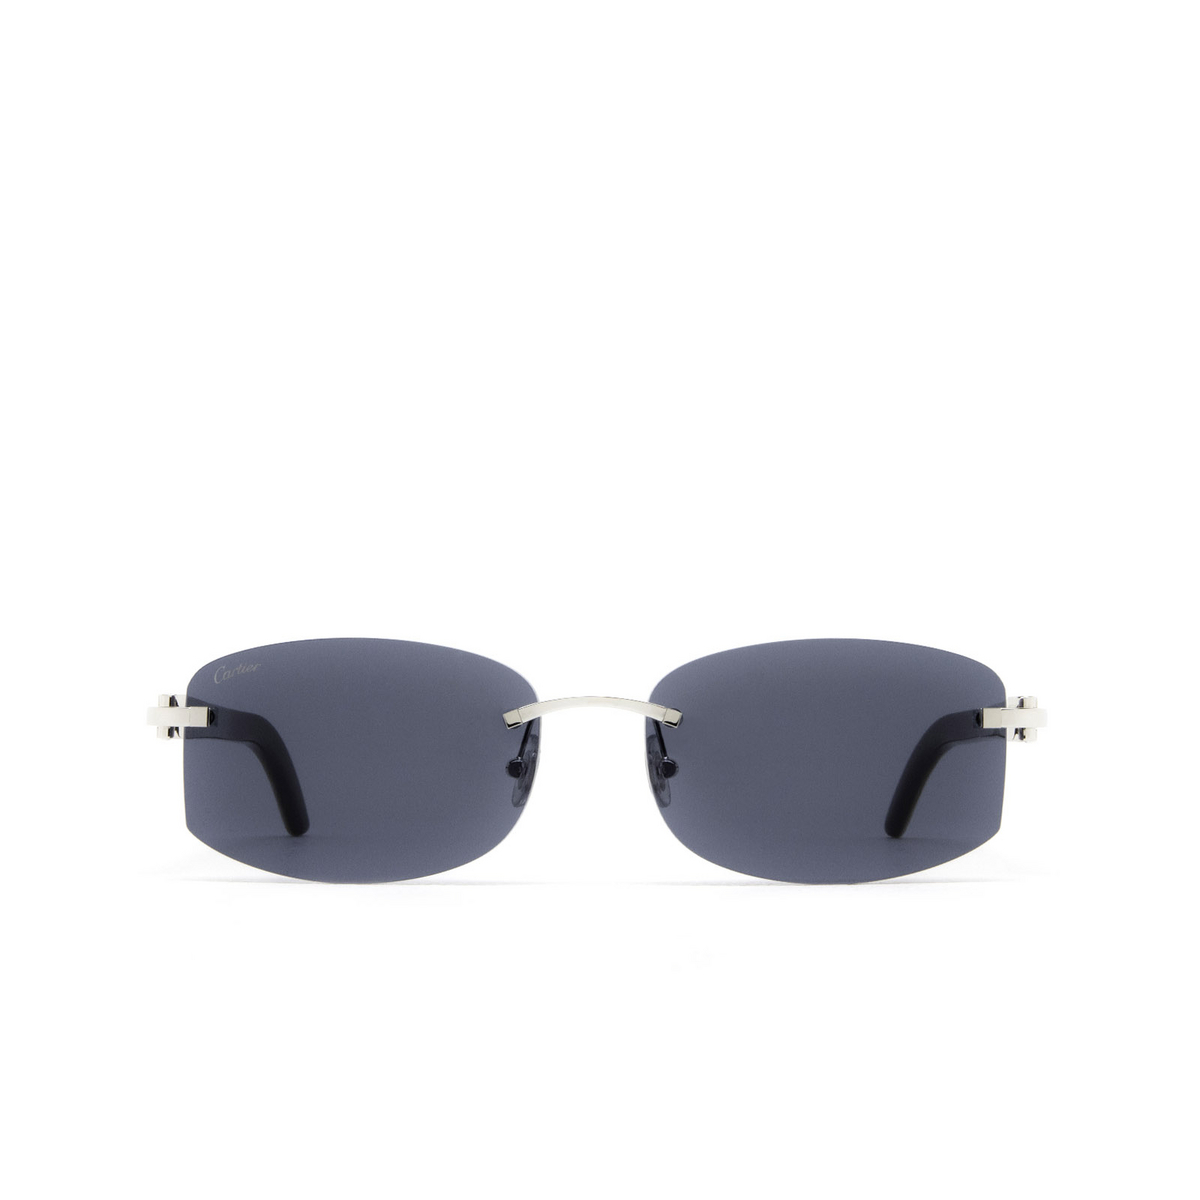 Cartier® Rectangle Sunglasses: CT0031RS color Silver 002 - front view.